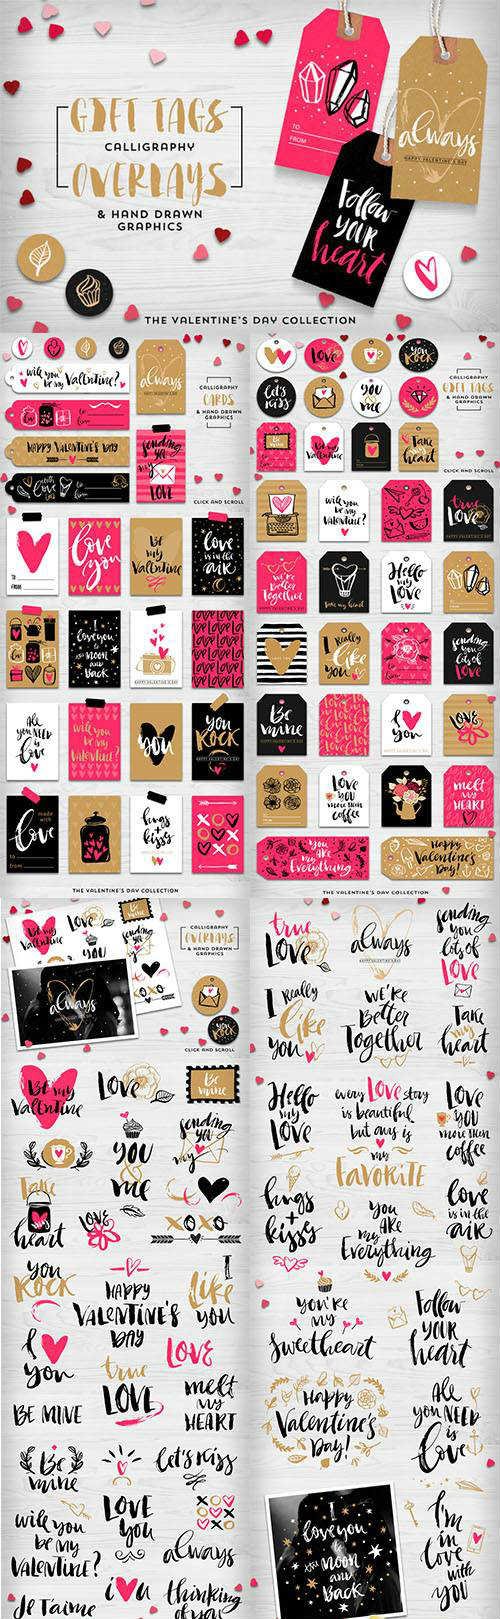 Valentine's day gift tags & overlays 518165